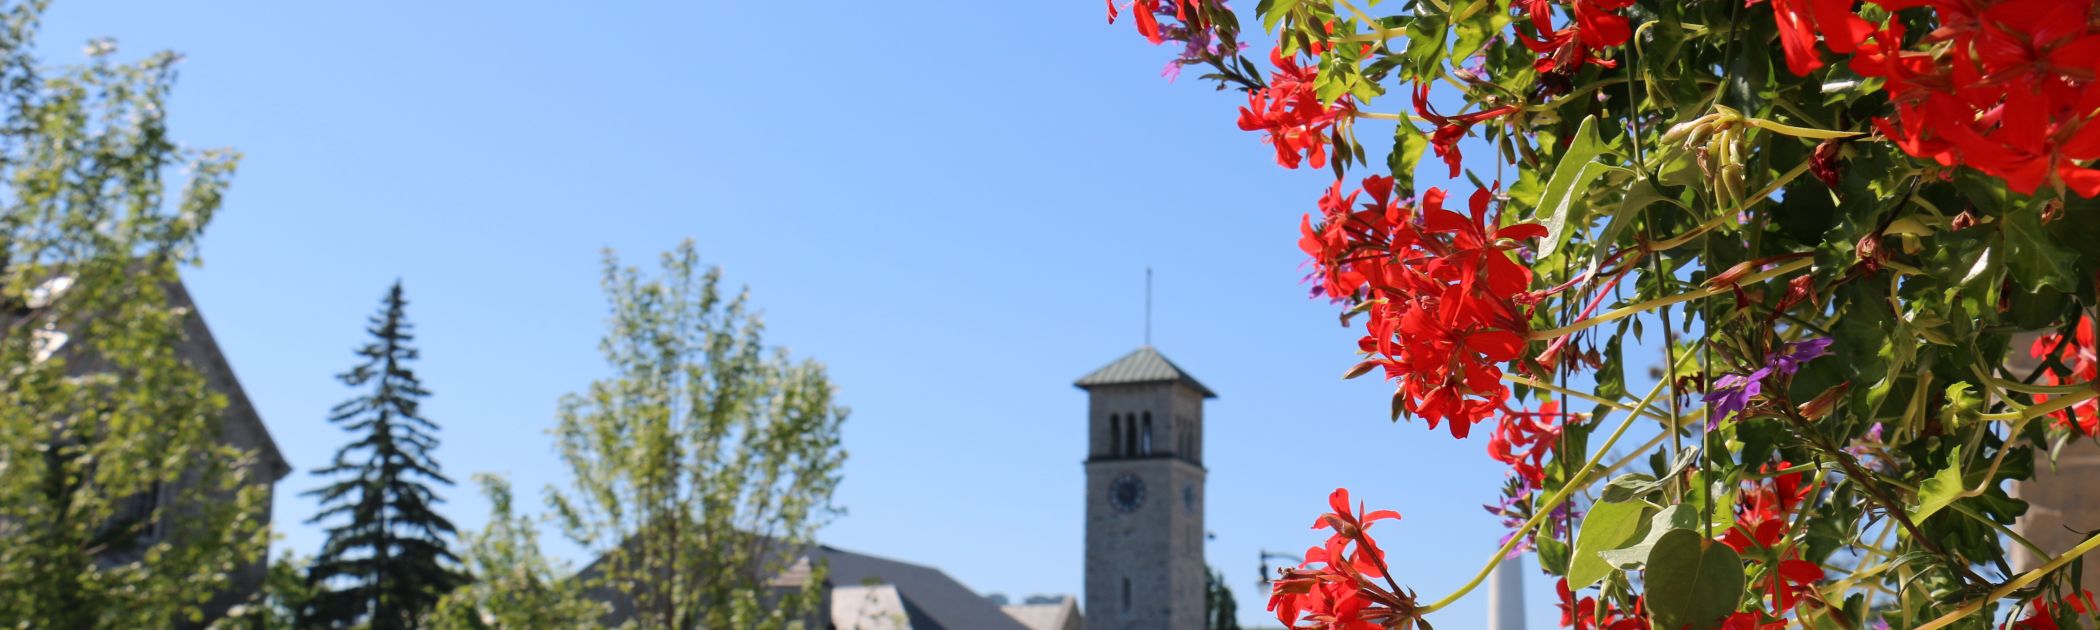 An image of Queen's campus in the summer with red flowers in the foreground